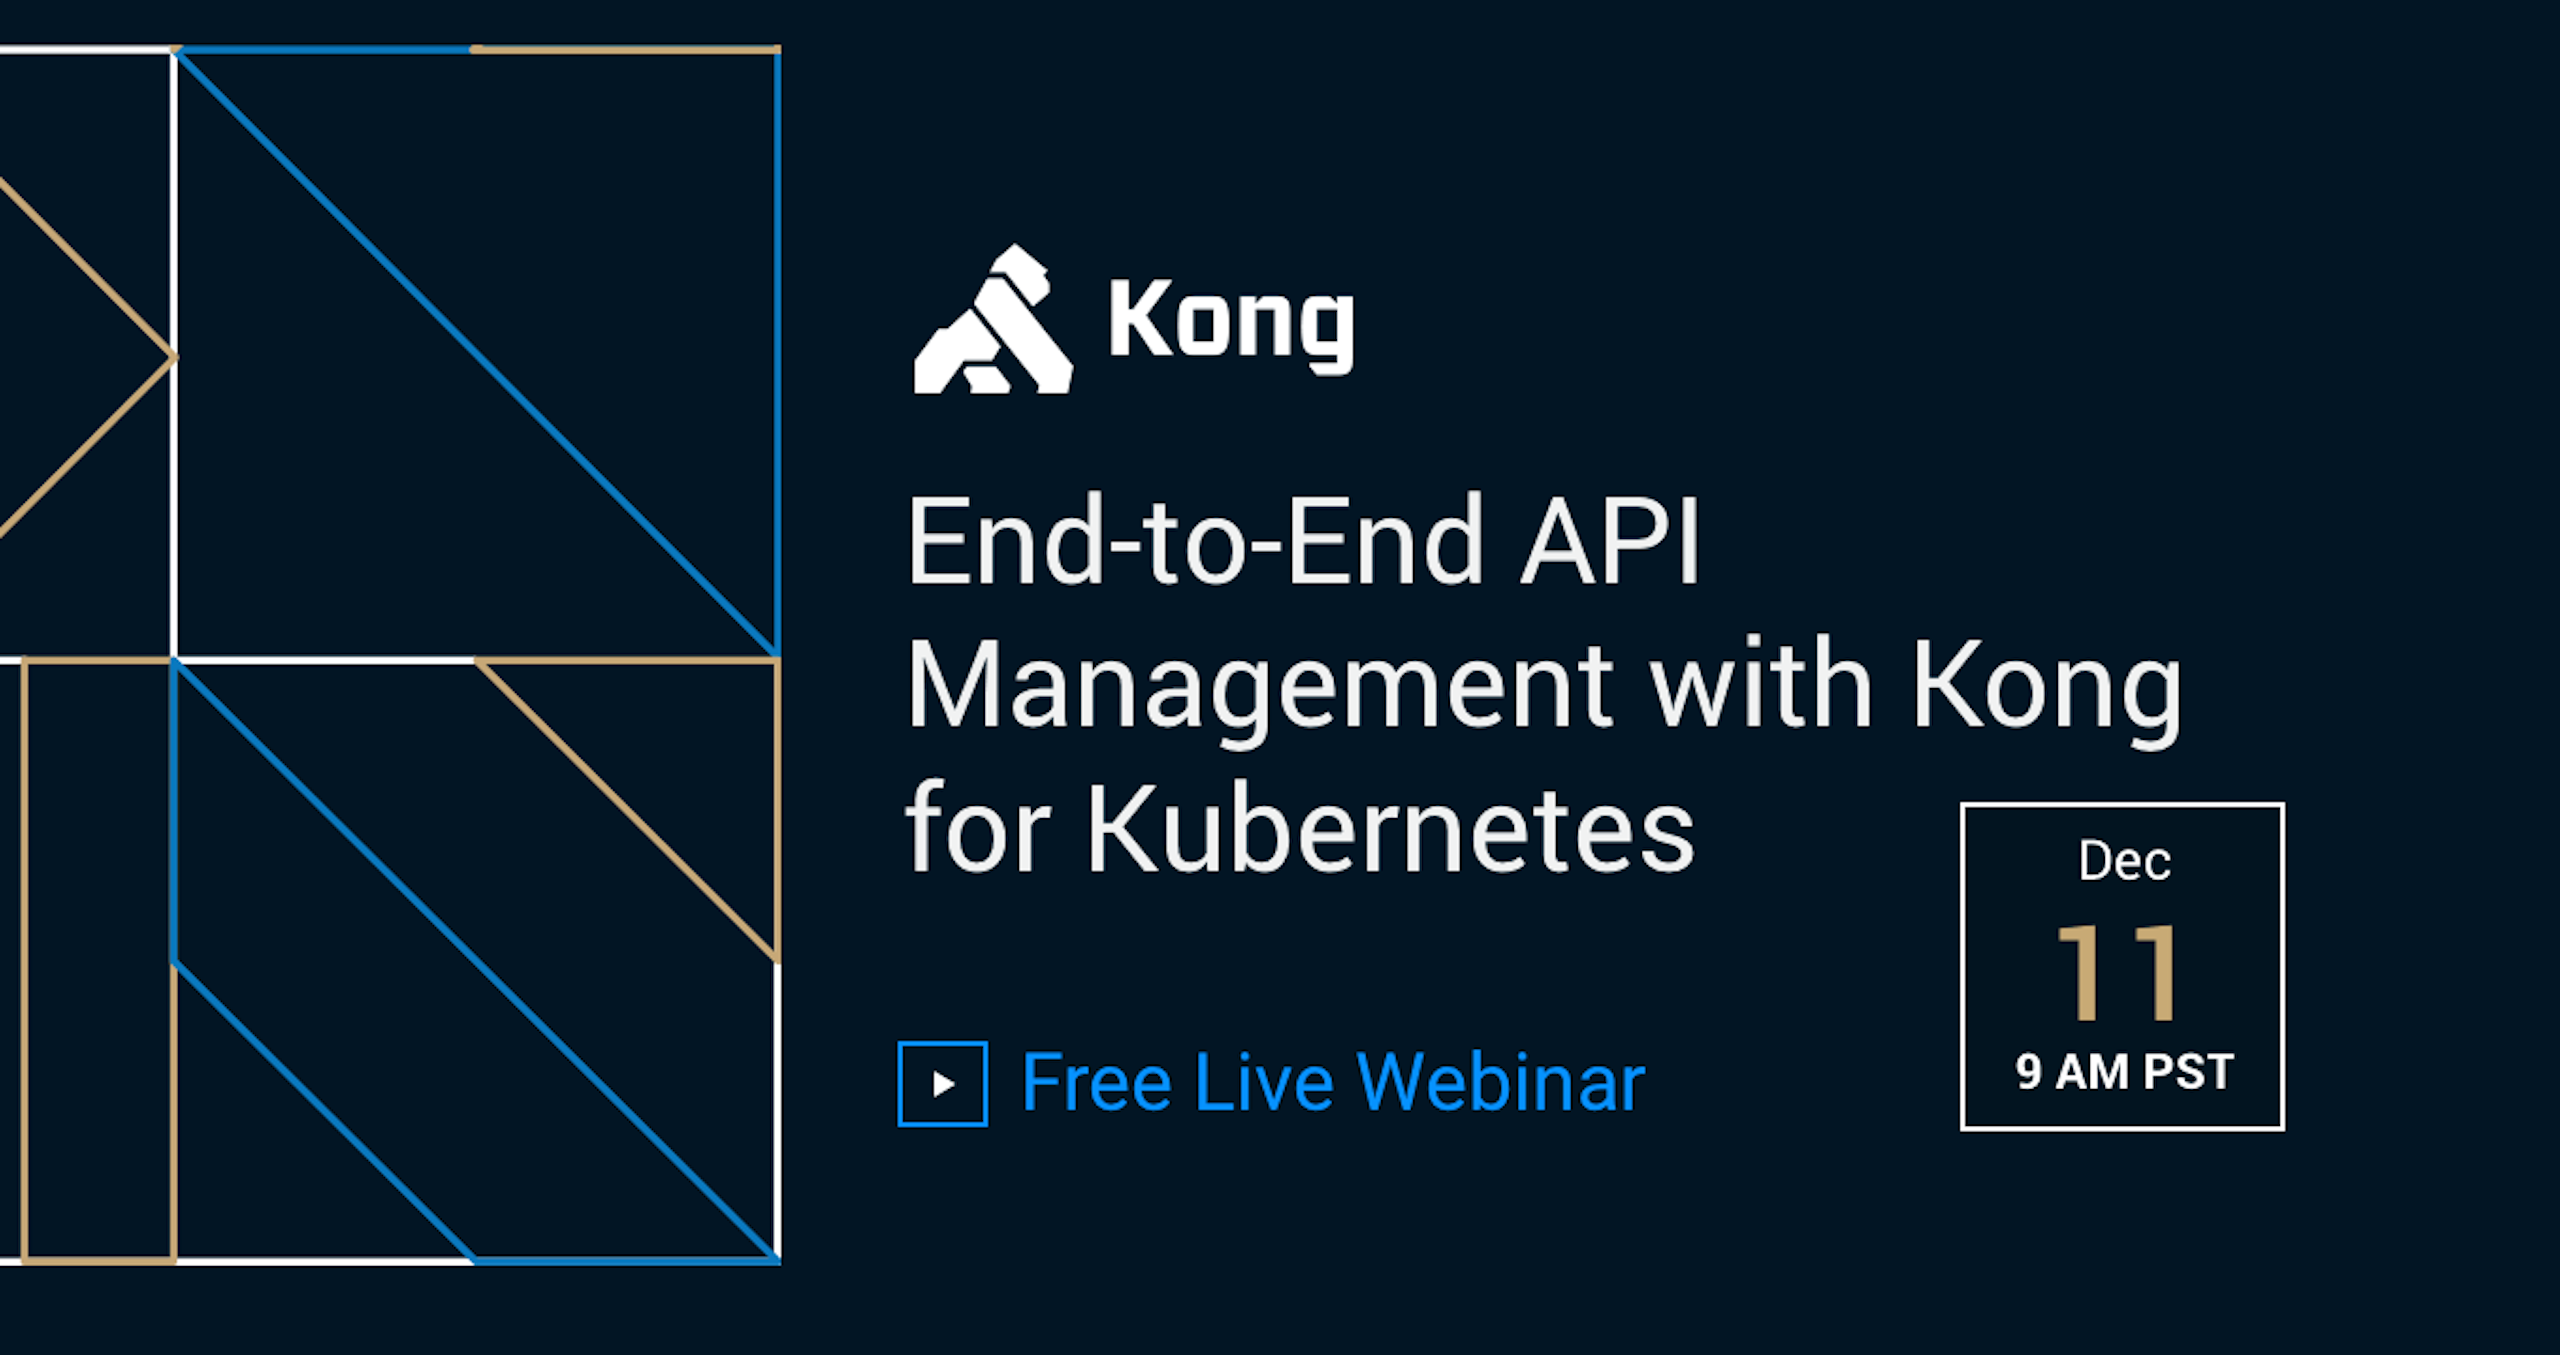 End-to-End API Management with Kong for Kubernetes